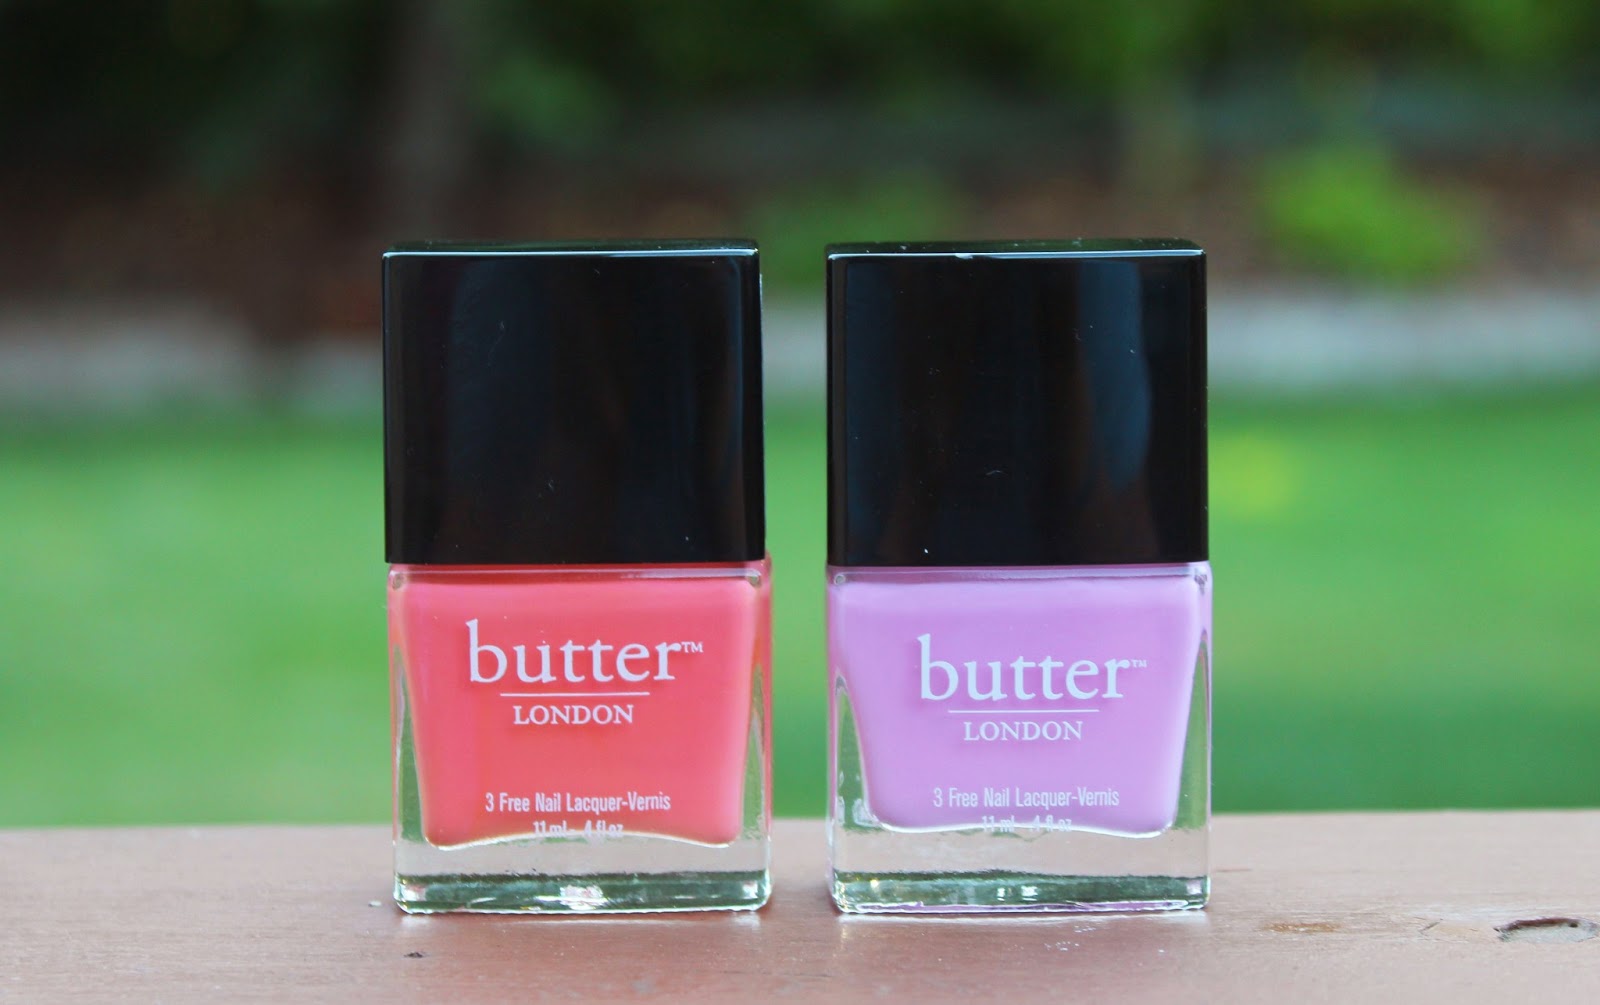 10. Butter London Nail Lacquer in "Cotton Buds" - wide 1